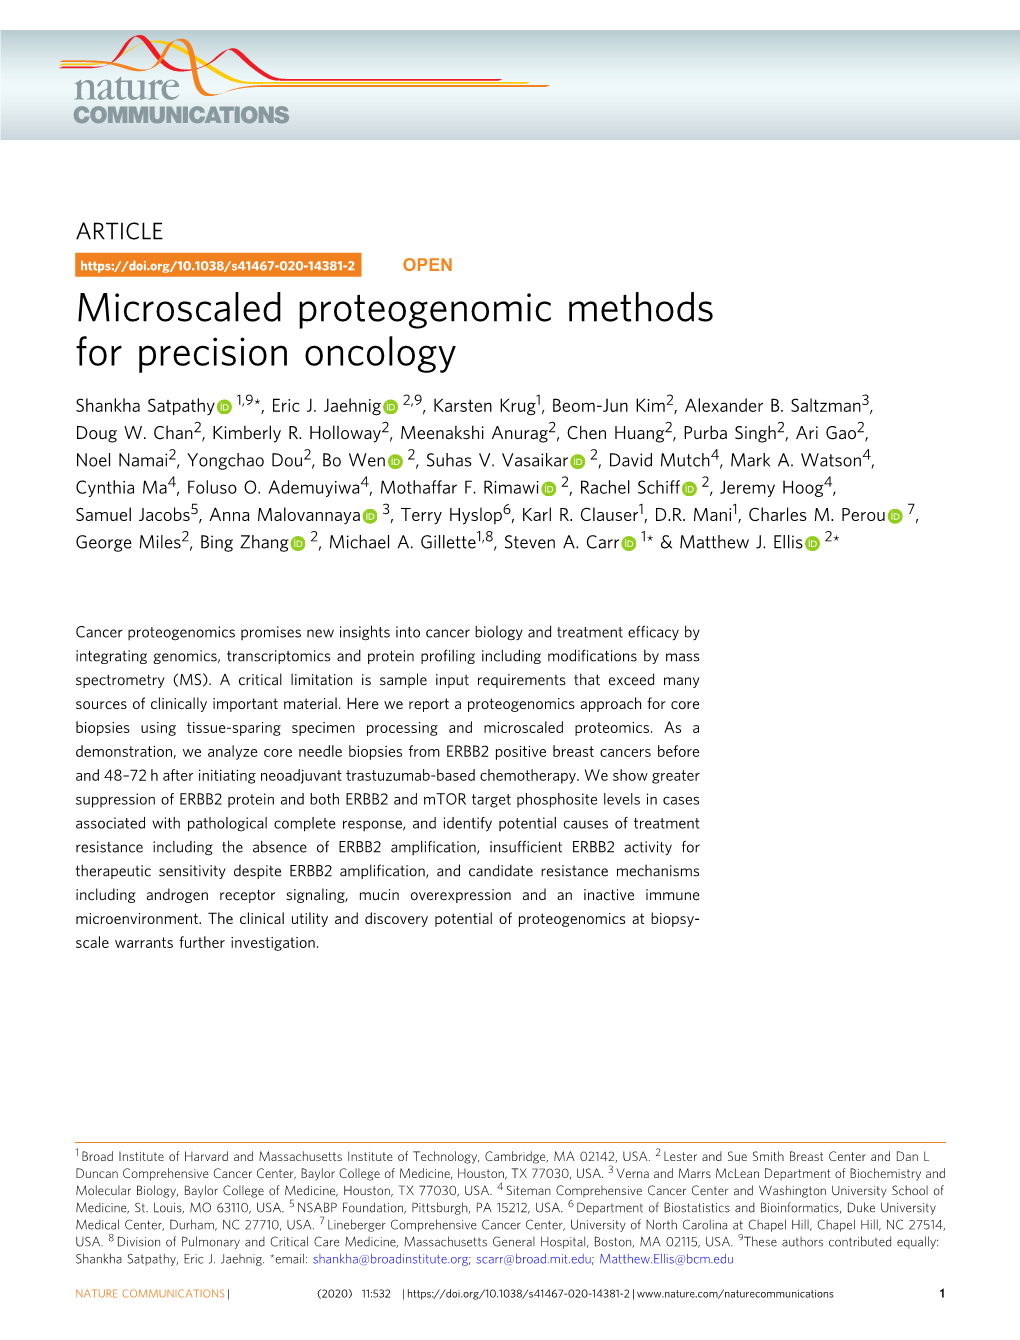 Microscaled Proteogenomic Methods for Precision Oncology